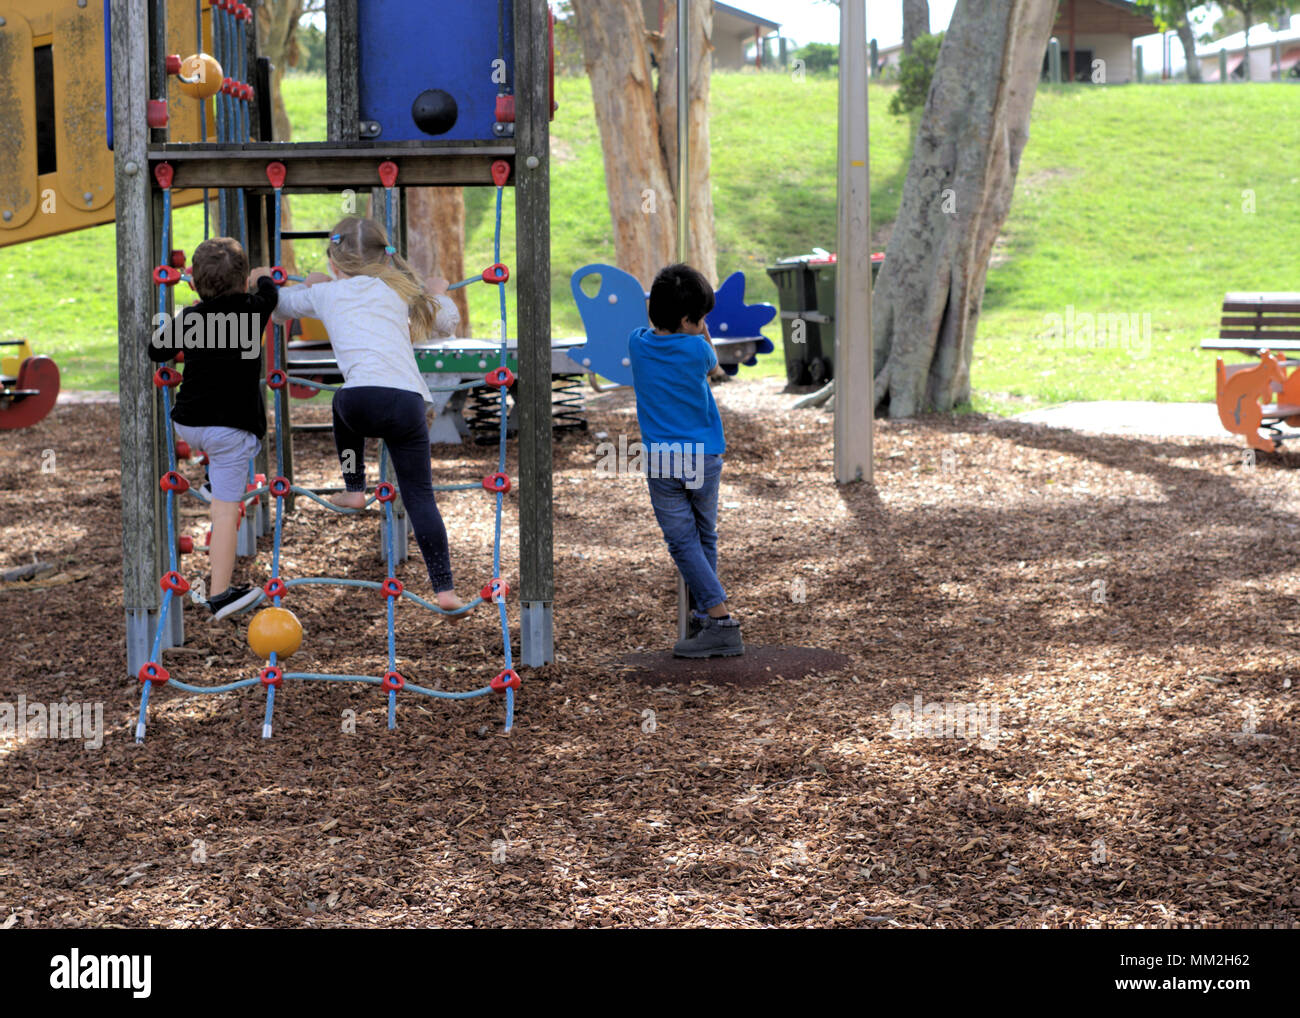 Children playing in park in Australia, Coffs Harbour. Kids climbing on ride. Stock Photo